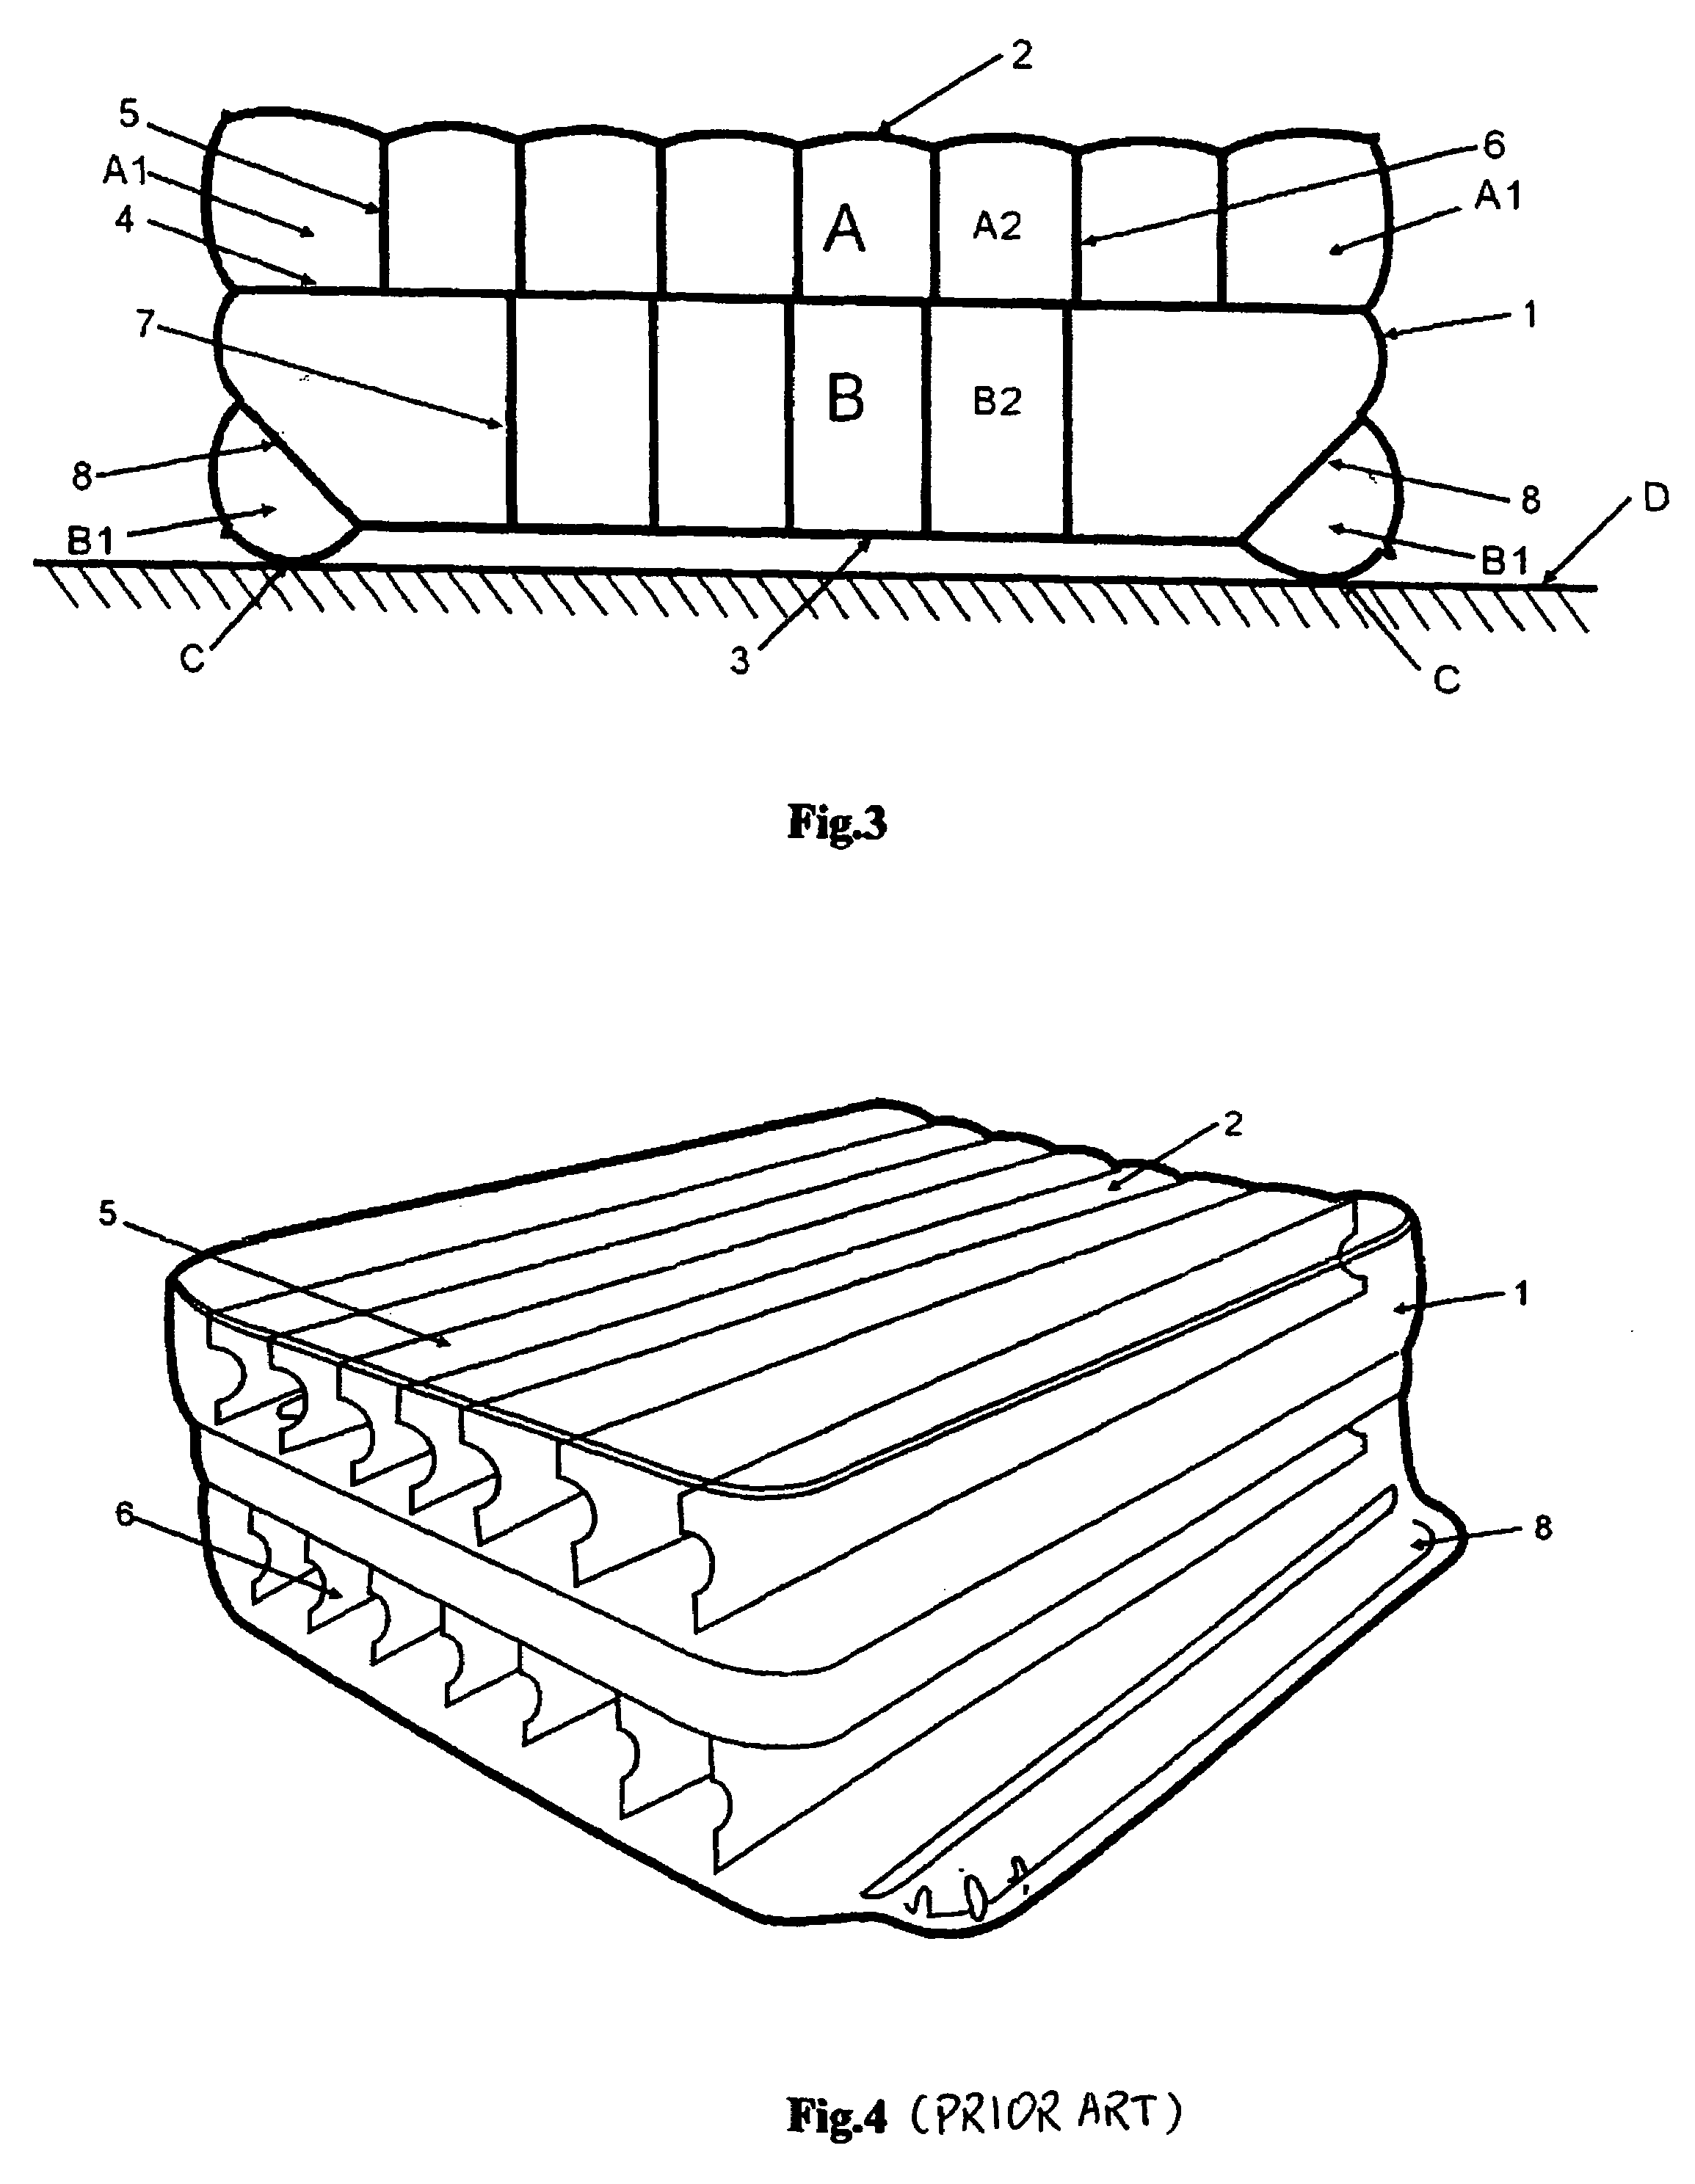 Air bed with stable supporting structure